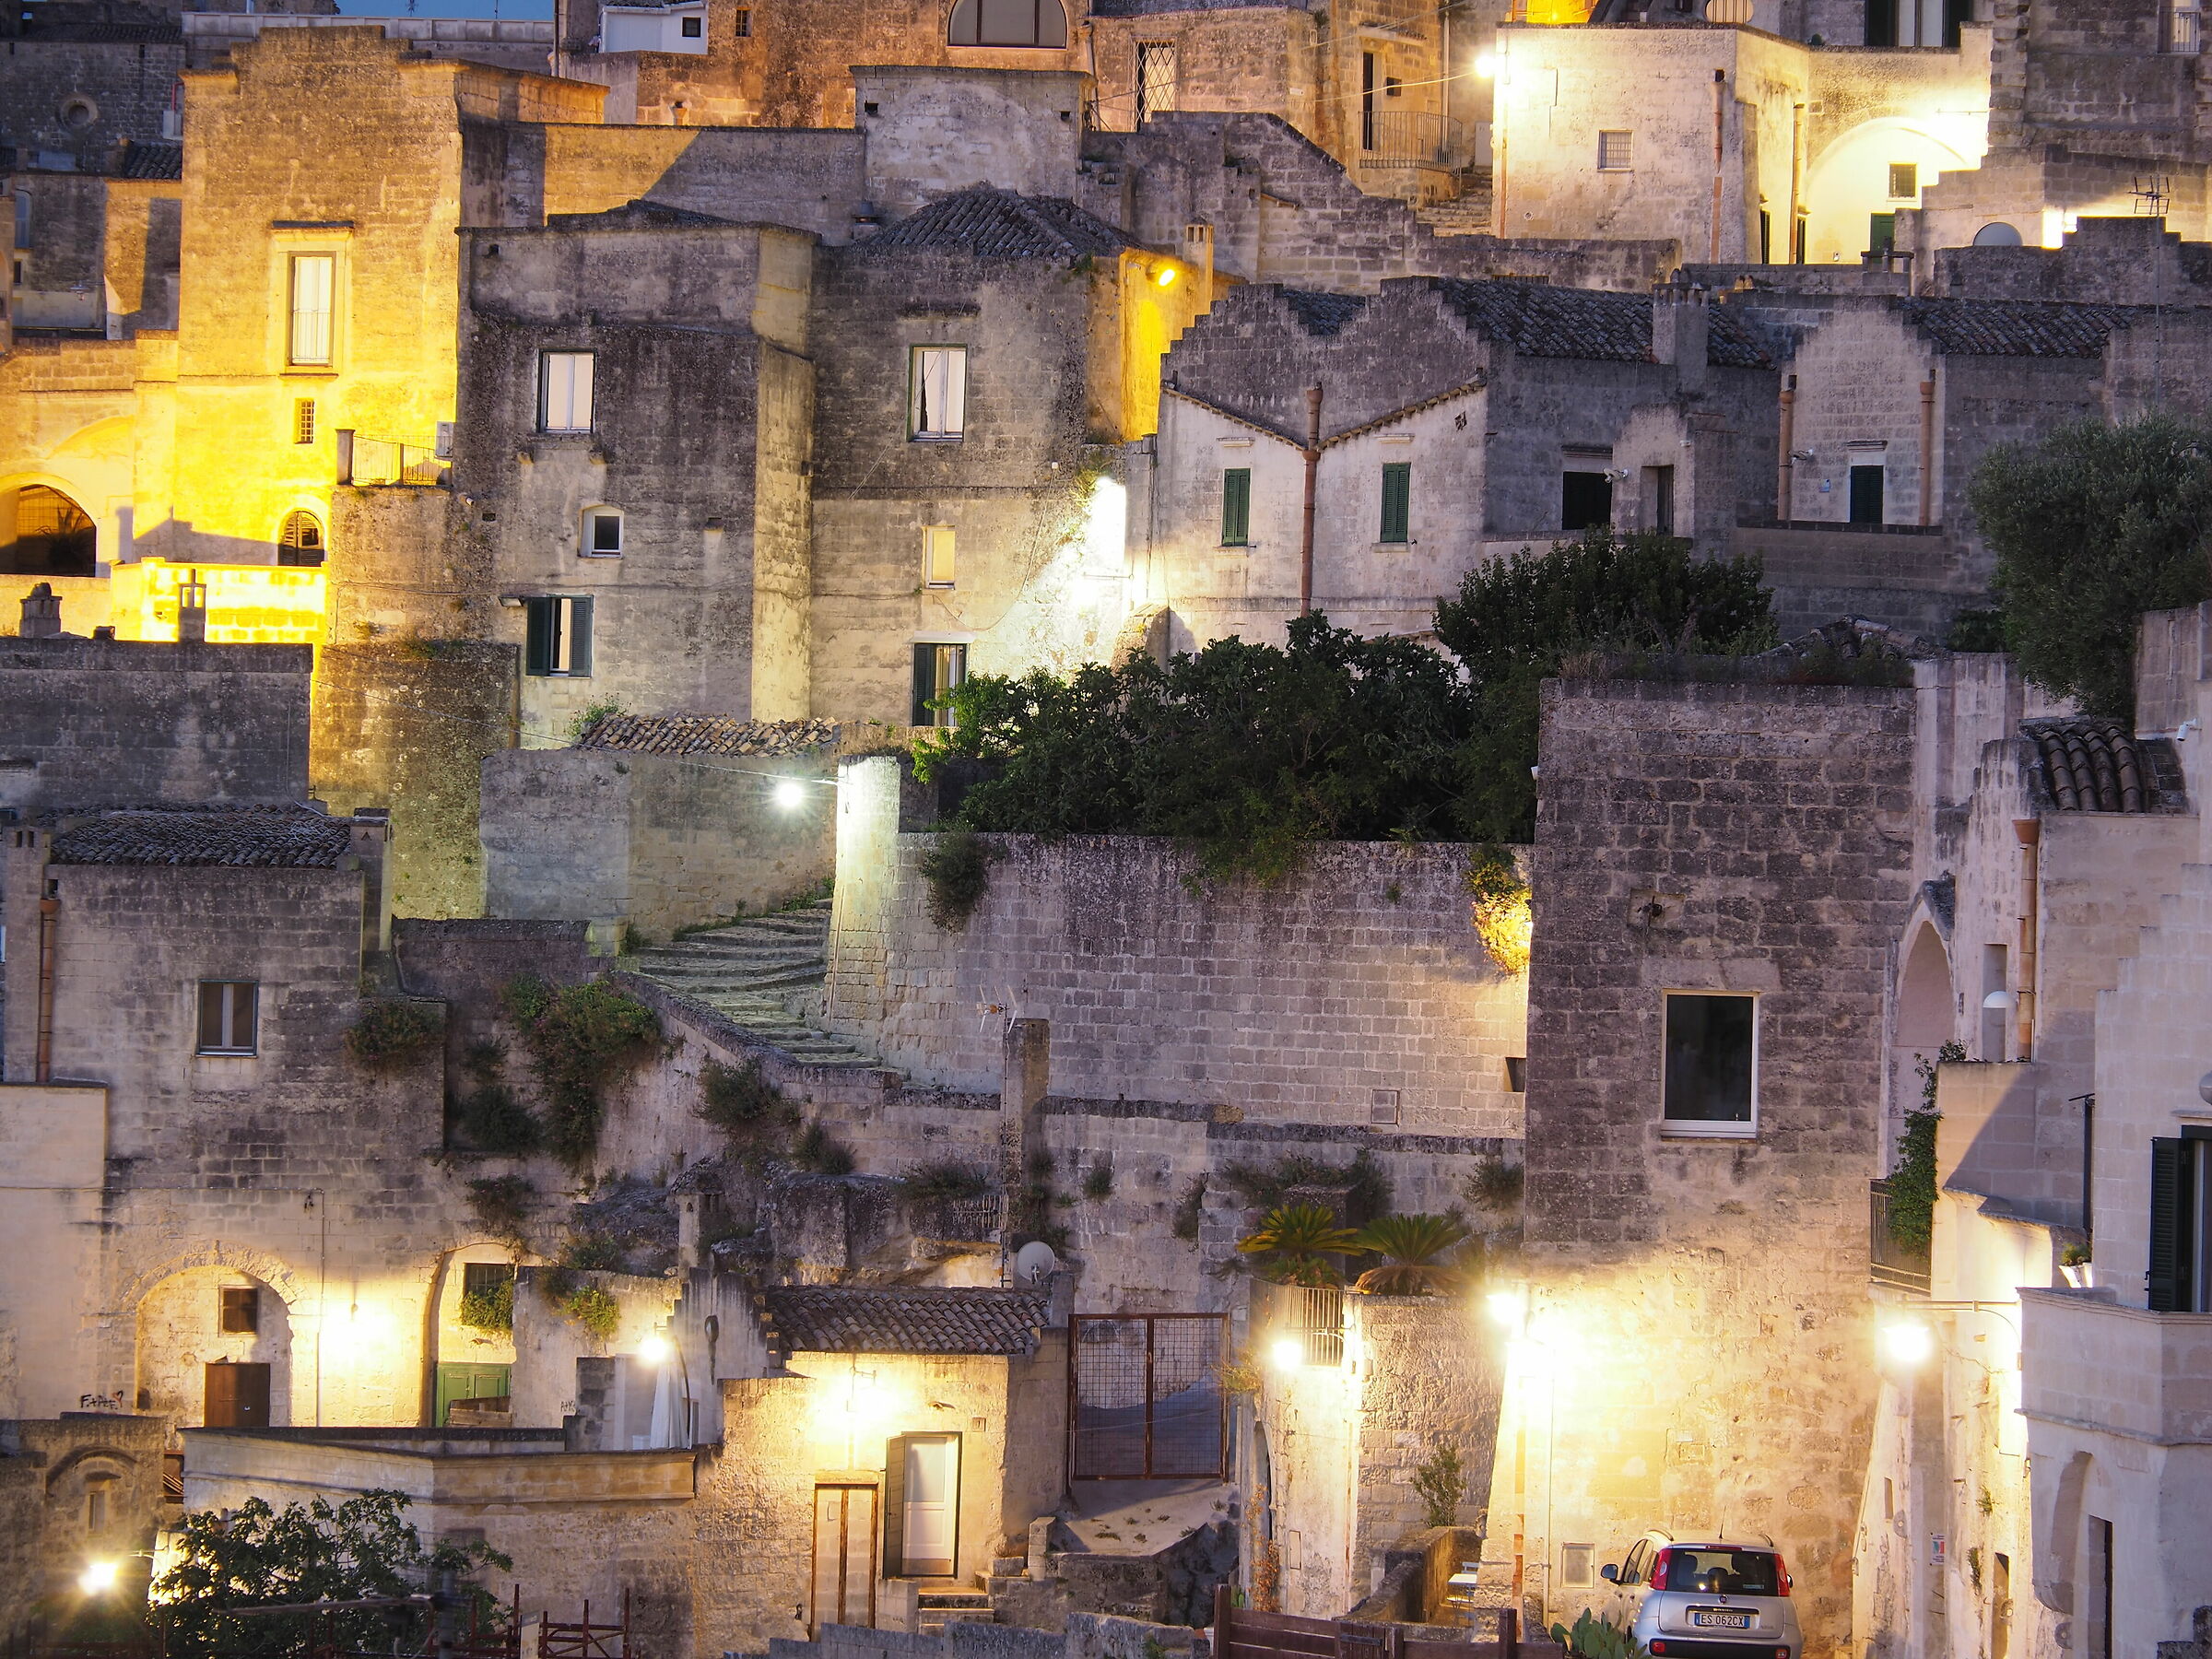 Among the Sassi, in Matera...